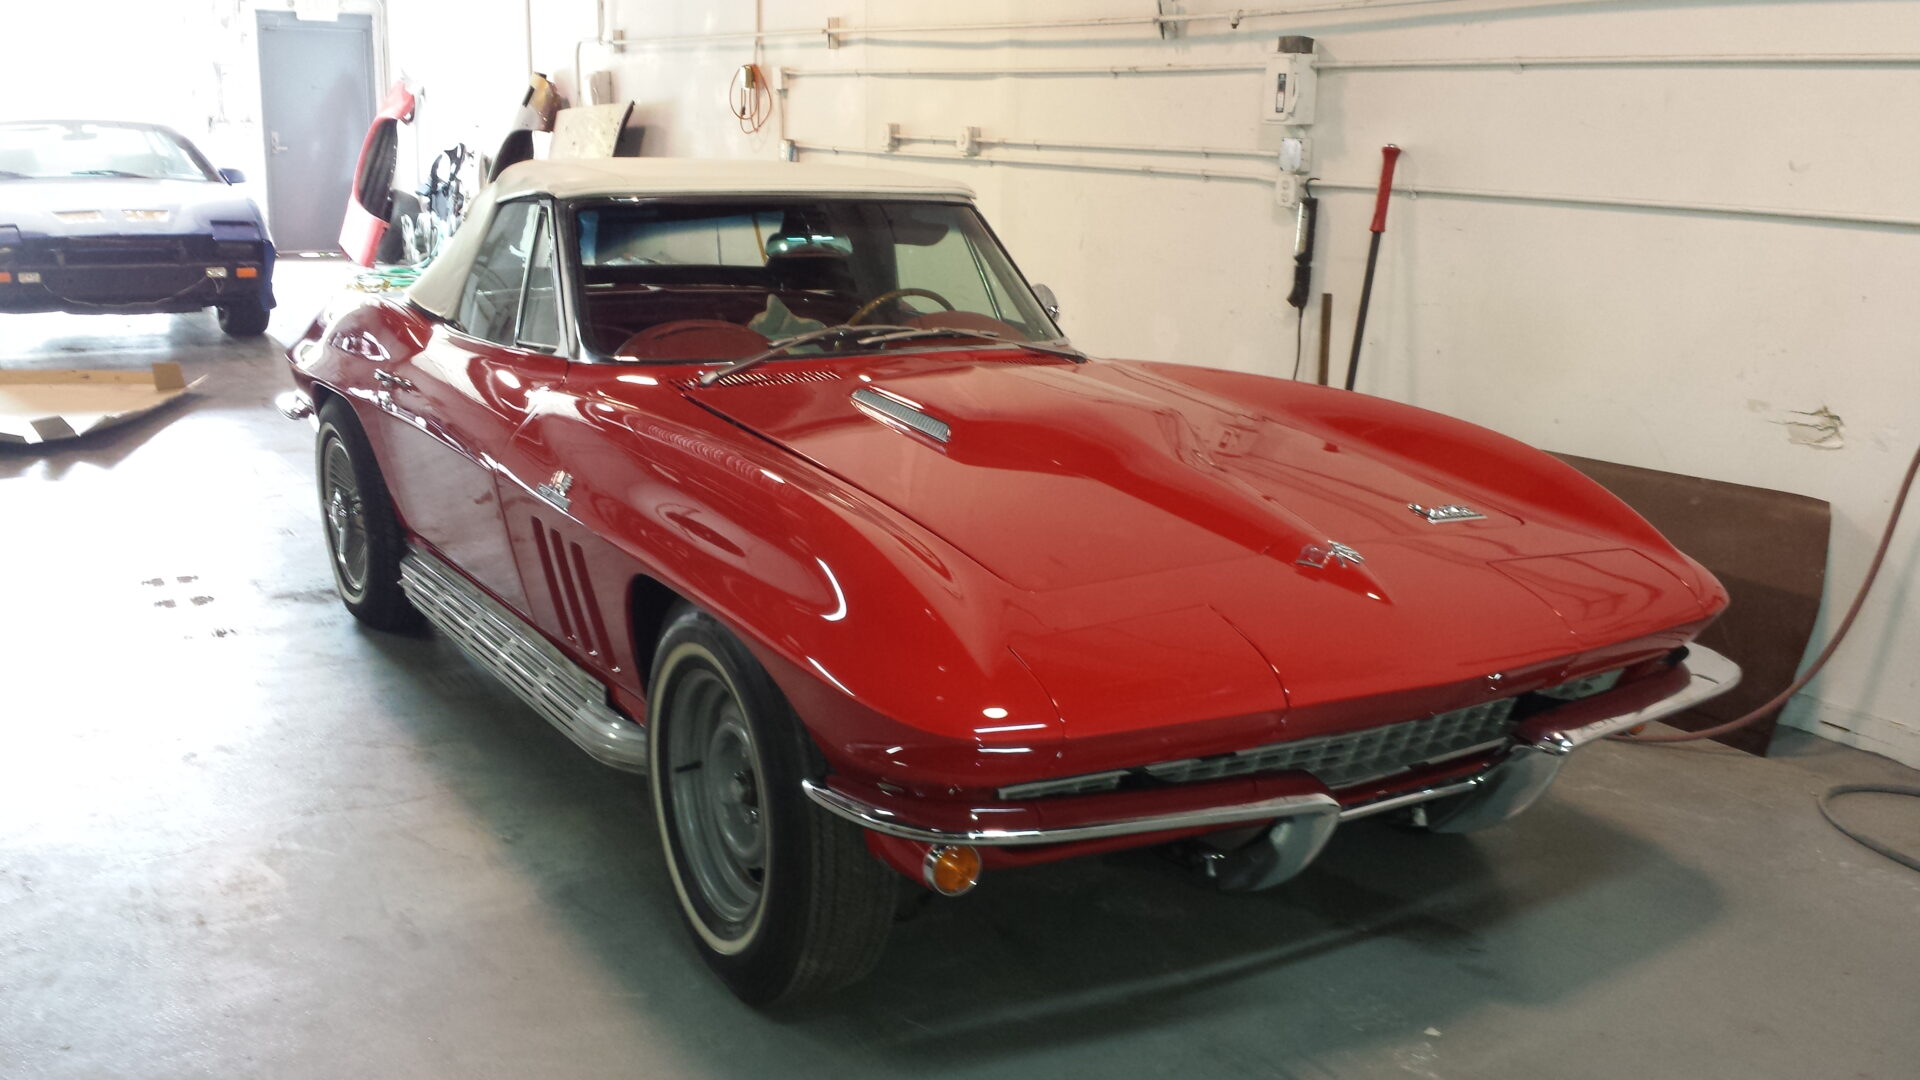 A newly painted red 1966 Corvette